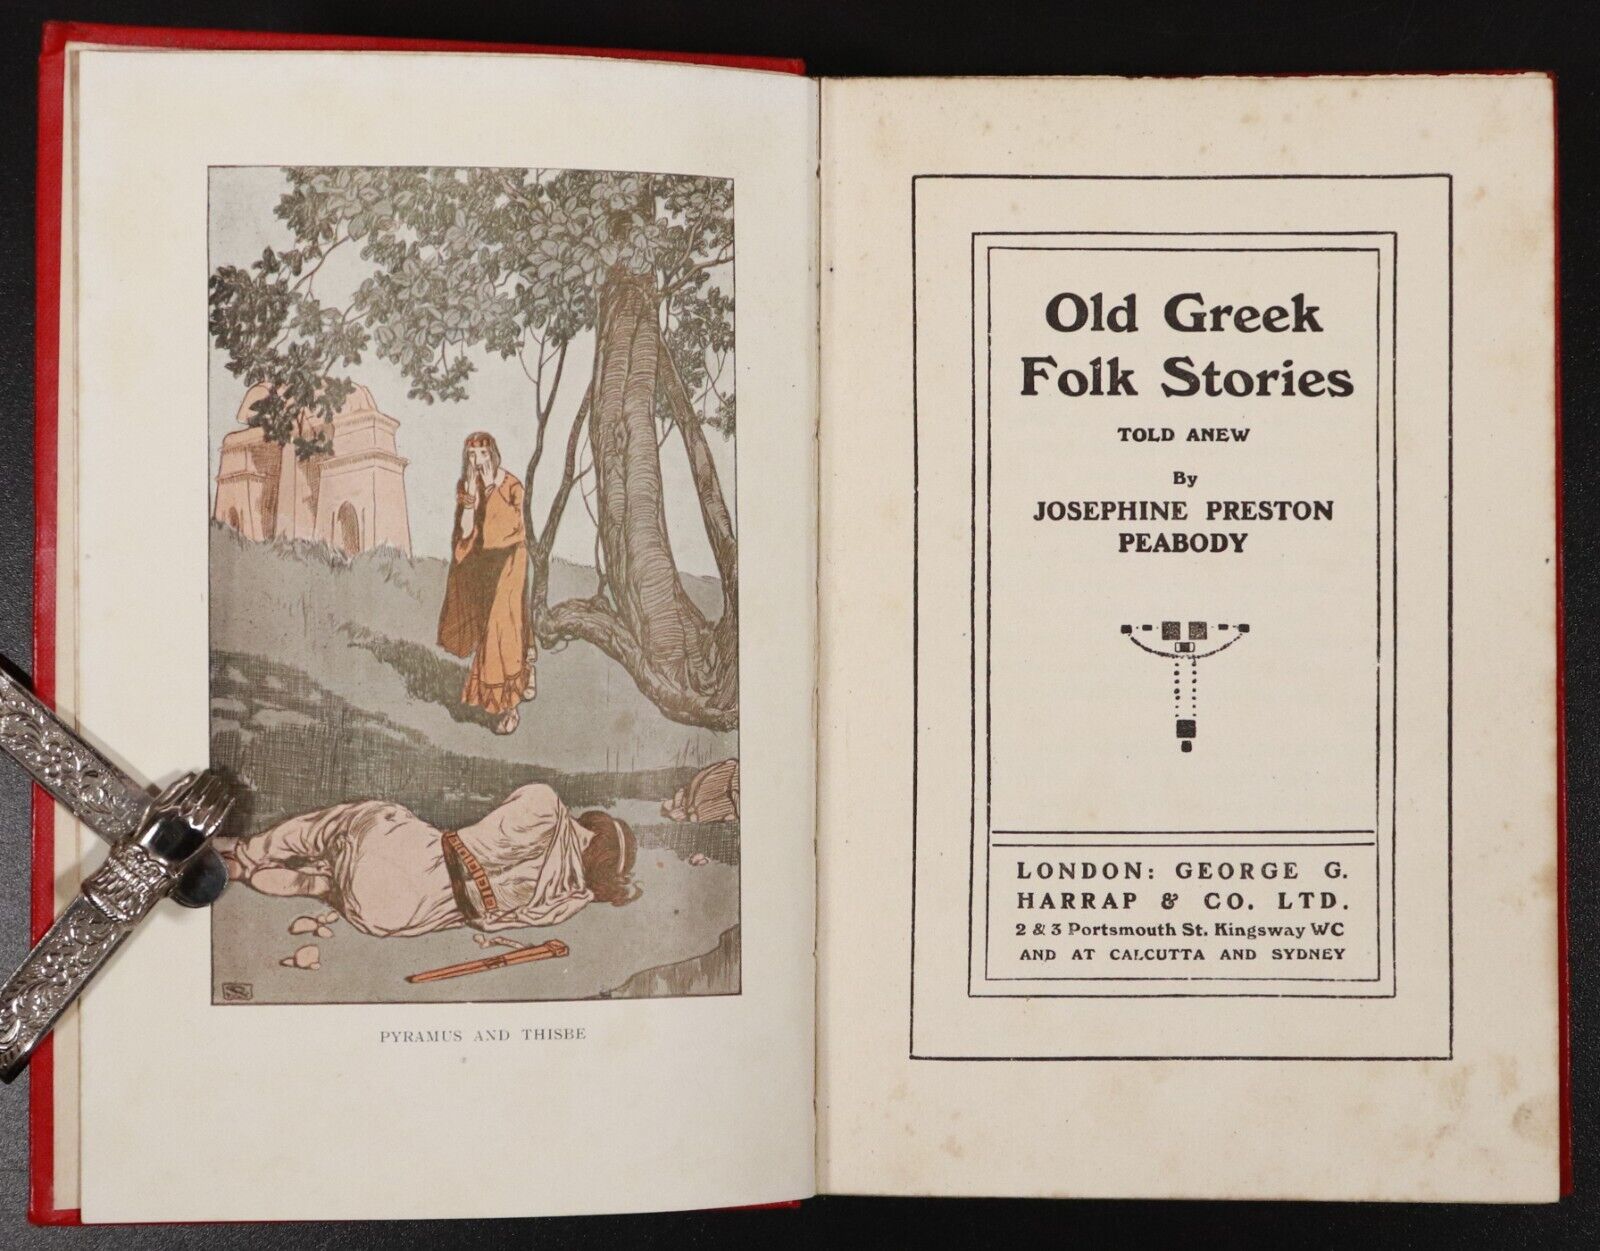 1925 Old Greek Folk Stories Told Anew by Josephine Preston Peabody Antique Book - 0